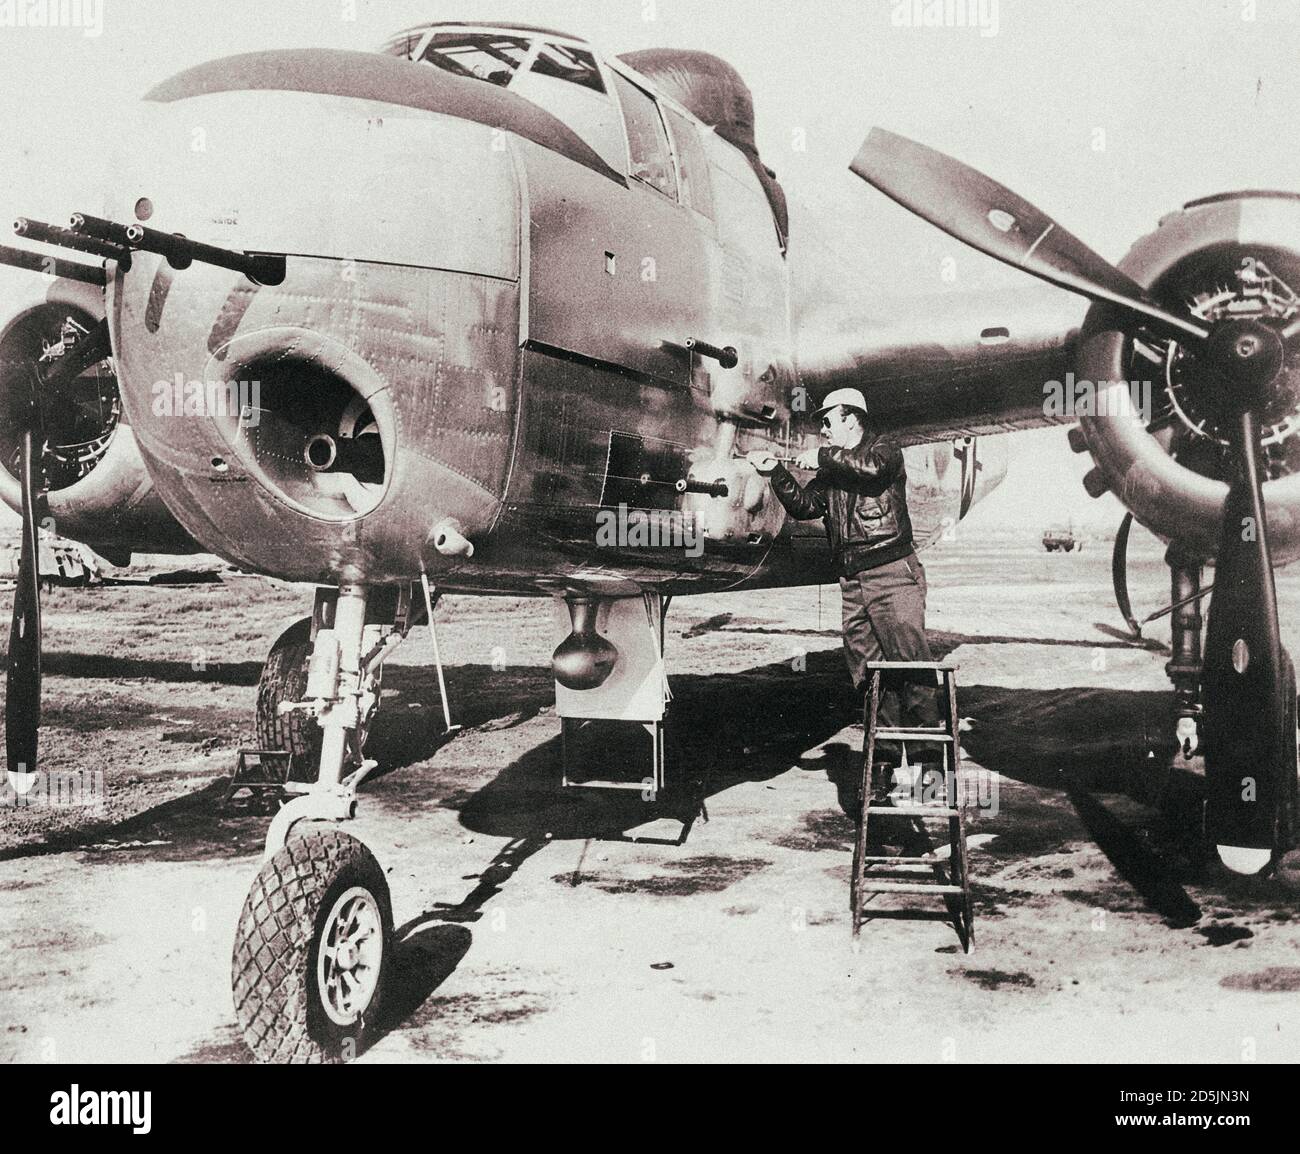 USAF North American B-25 Mitchell twin-engine bomber with Browning M2 machine guns of 12.7 mm caliber and 75 mm cannon during maintenance. Stock Photo